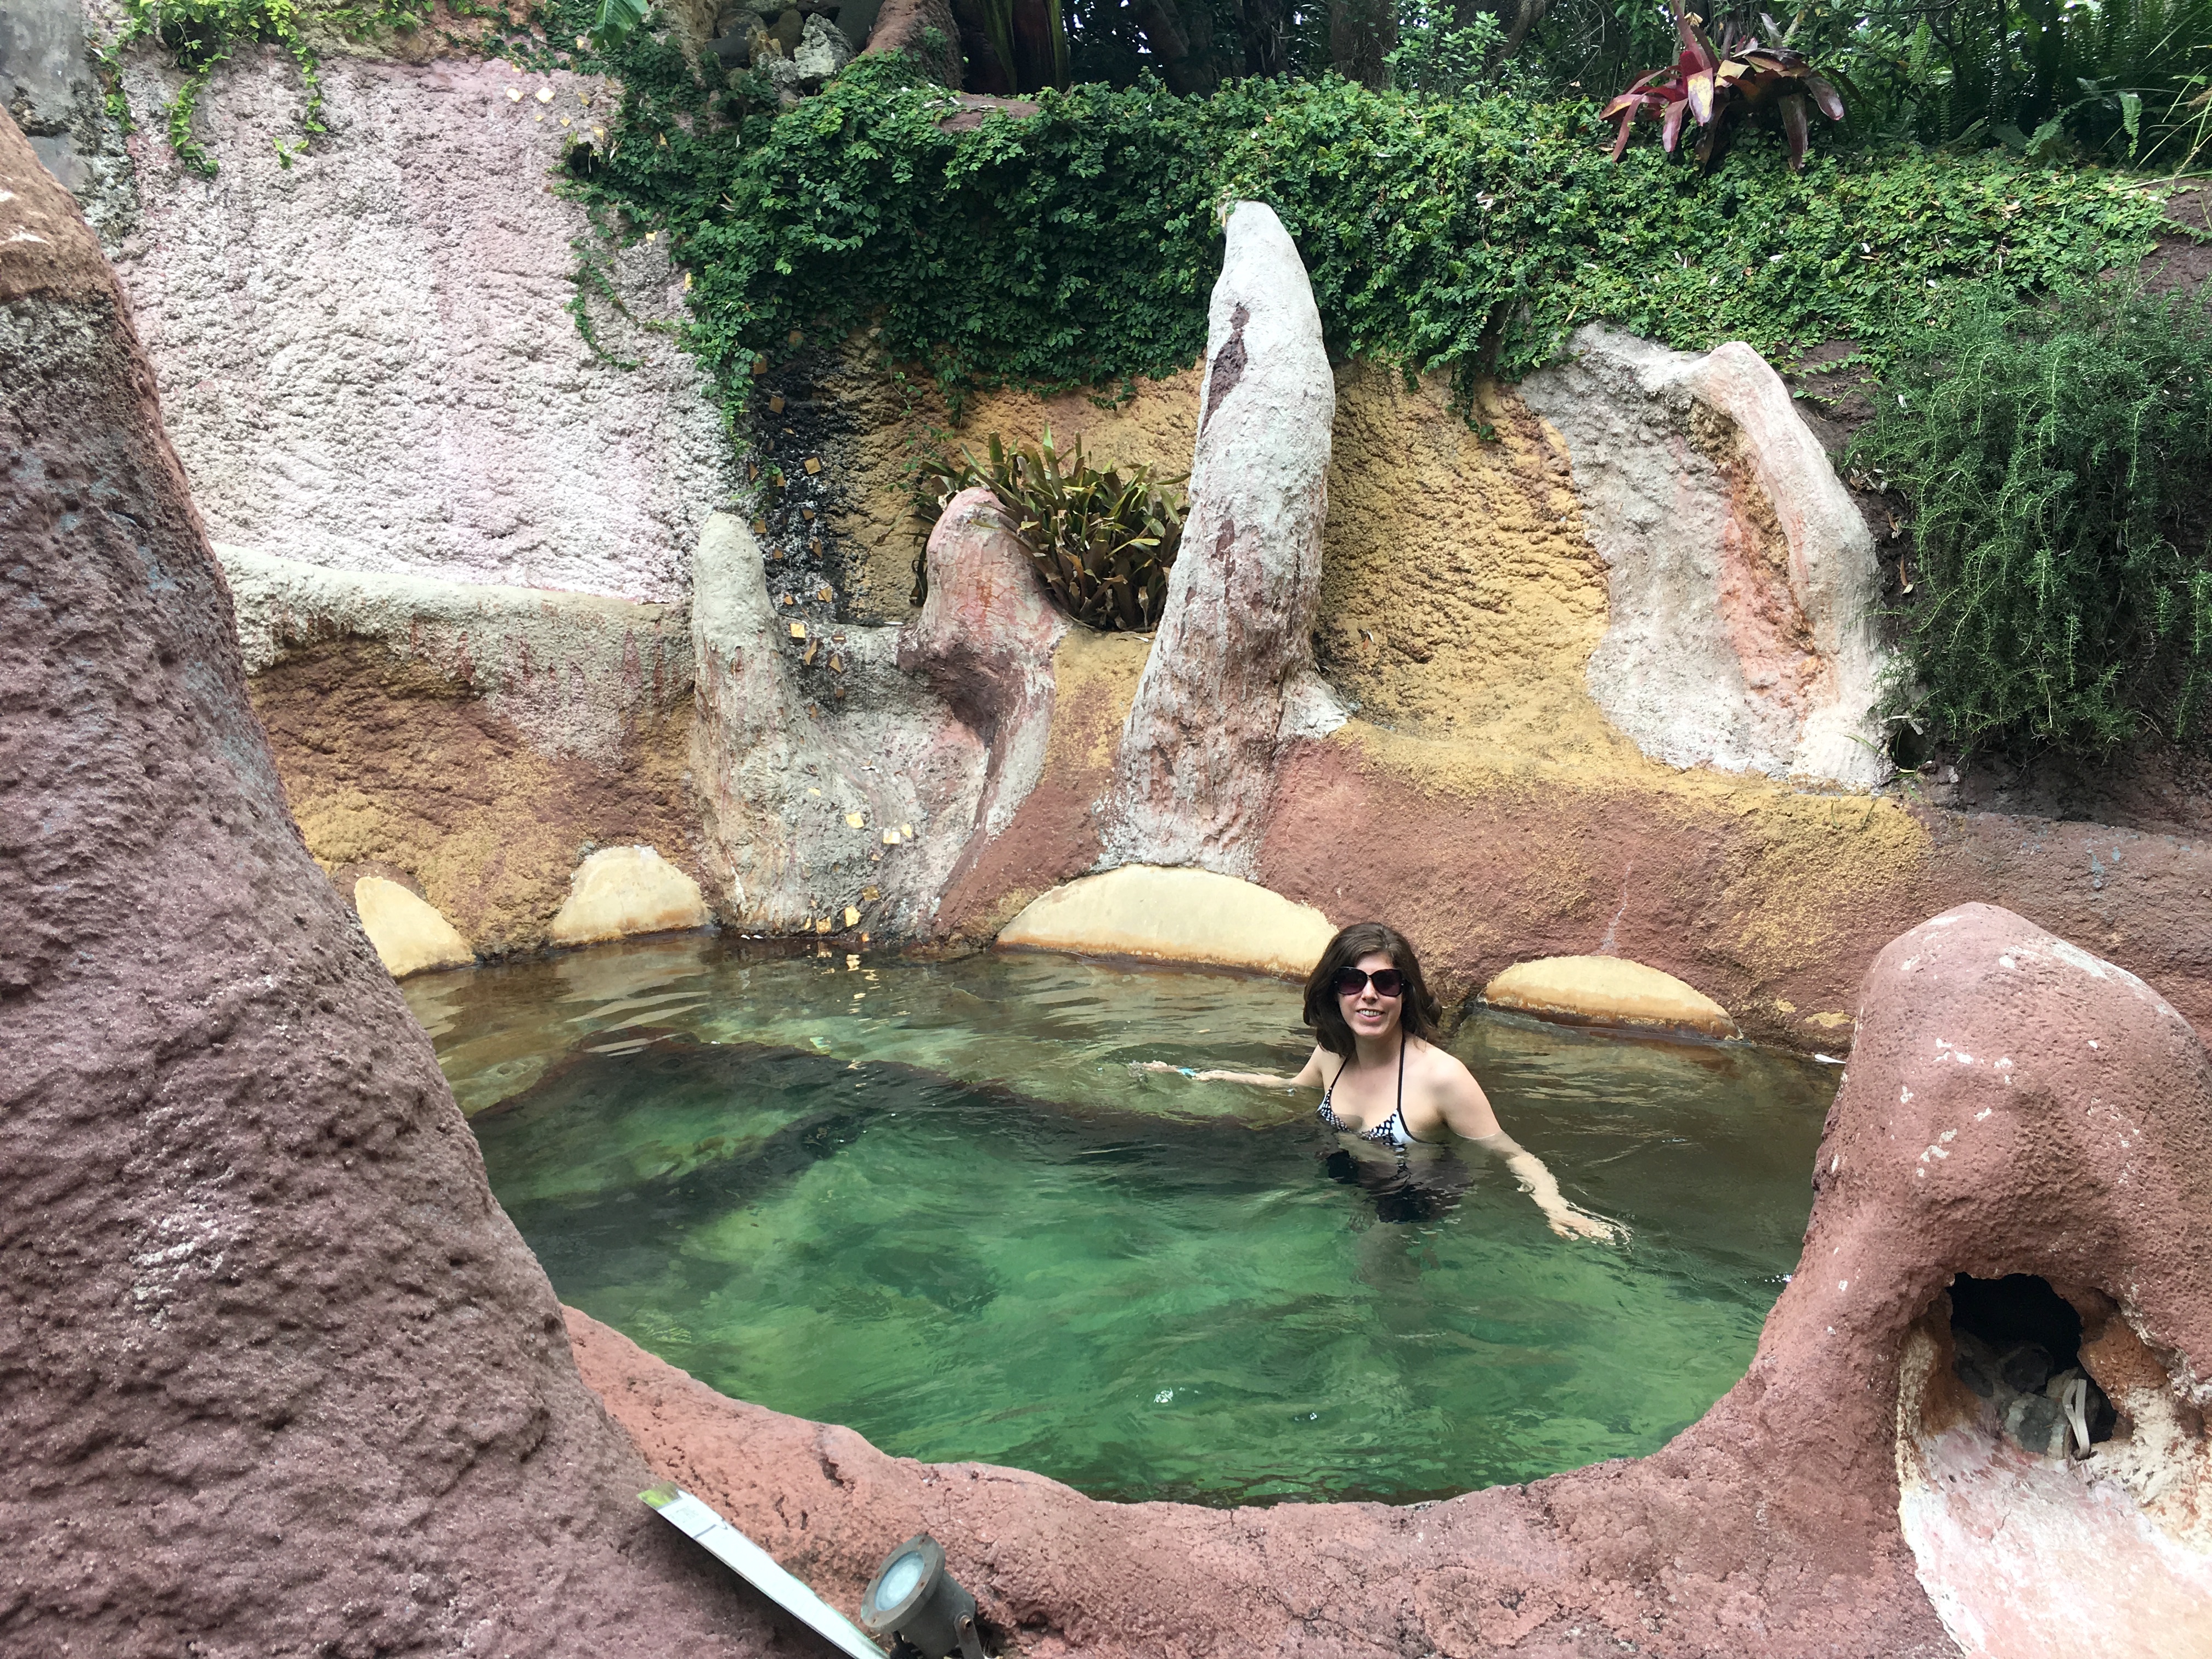 Living within the limits of chronic illness, traveling to hot springs